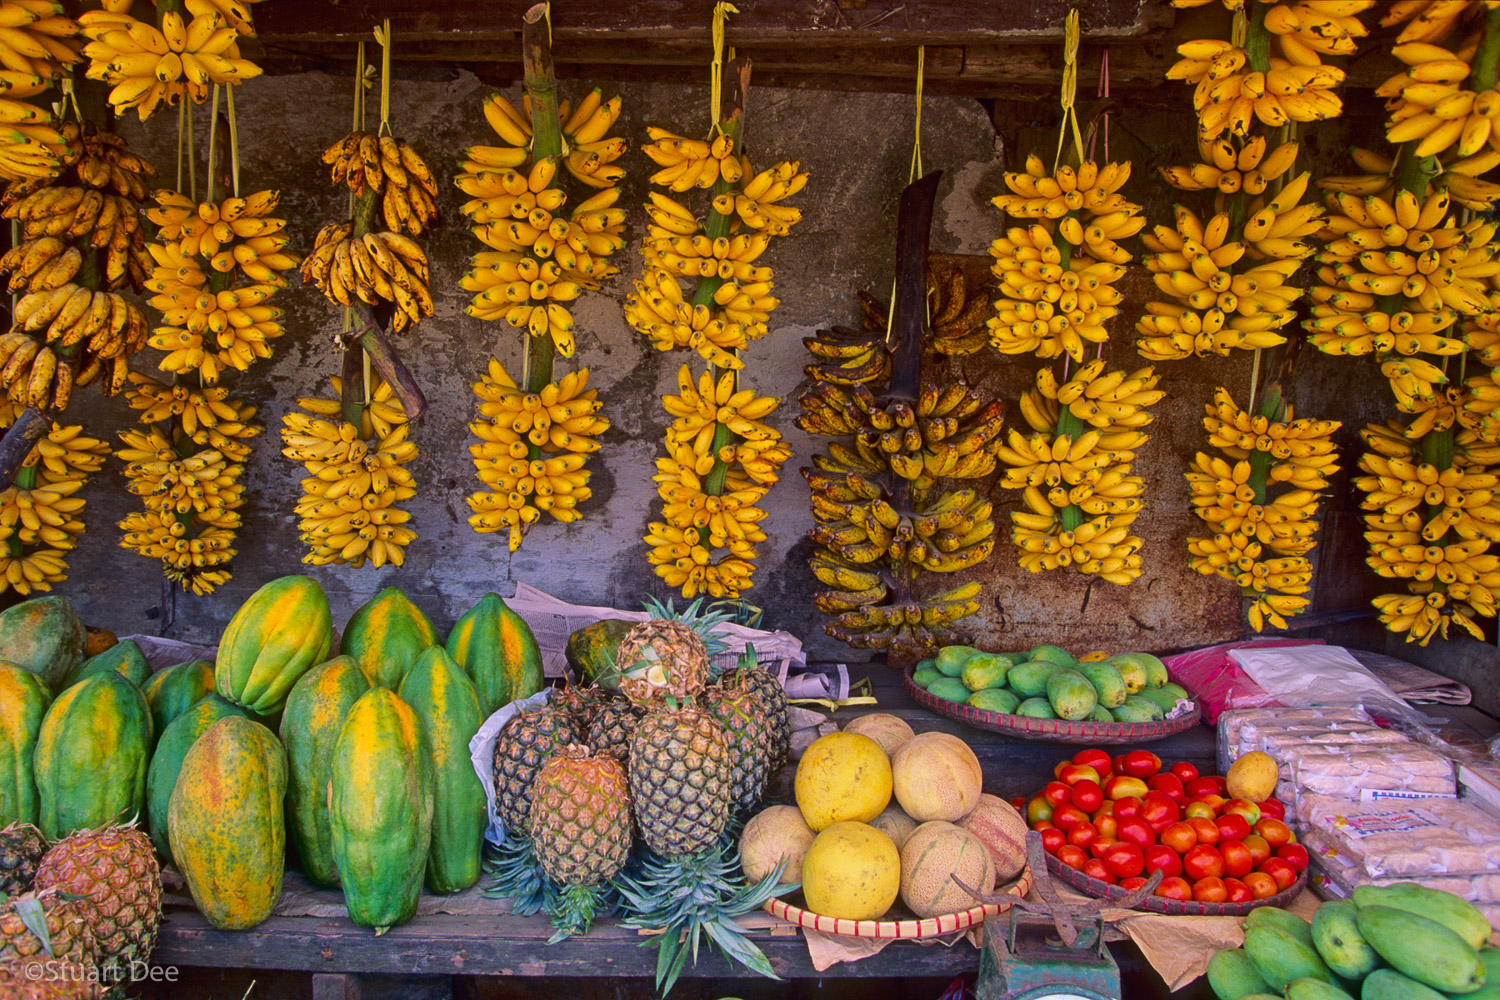  Fruit stand with bananas, papayas, pineapples, mangoes and other tropical fruit. Cavite, Philippines 